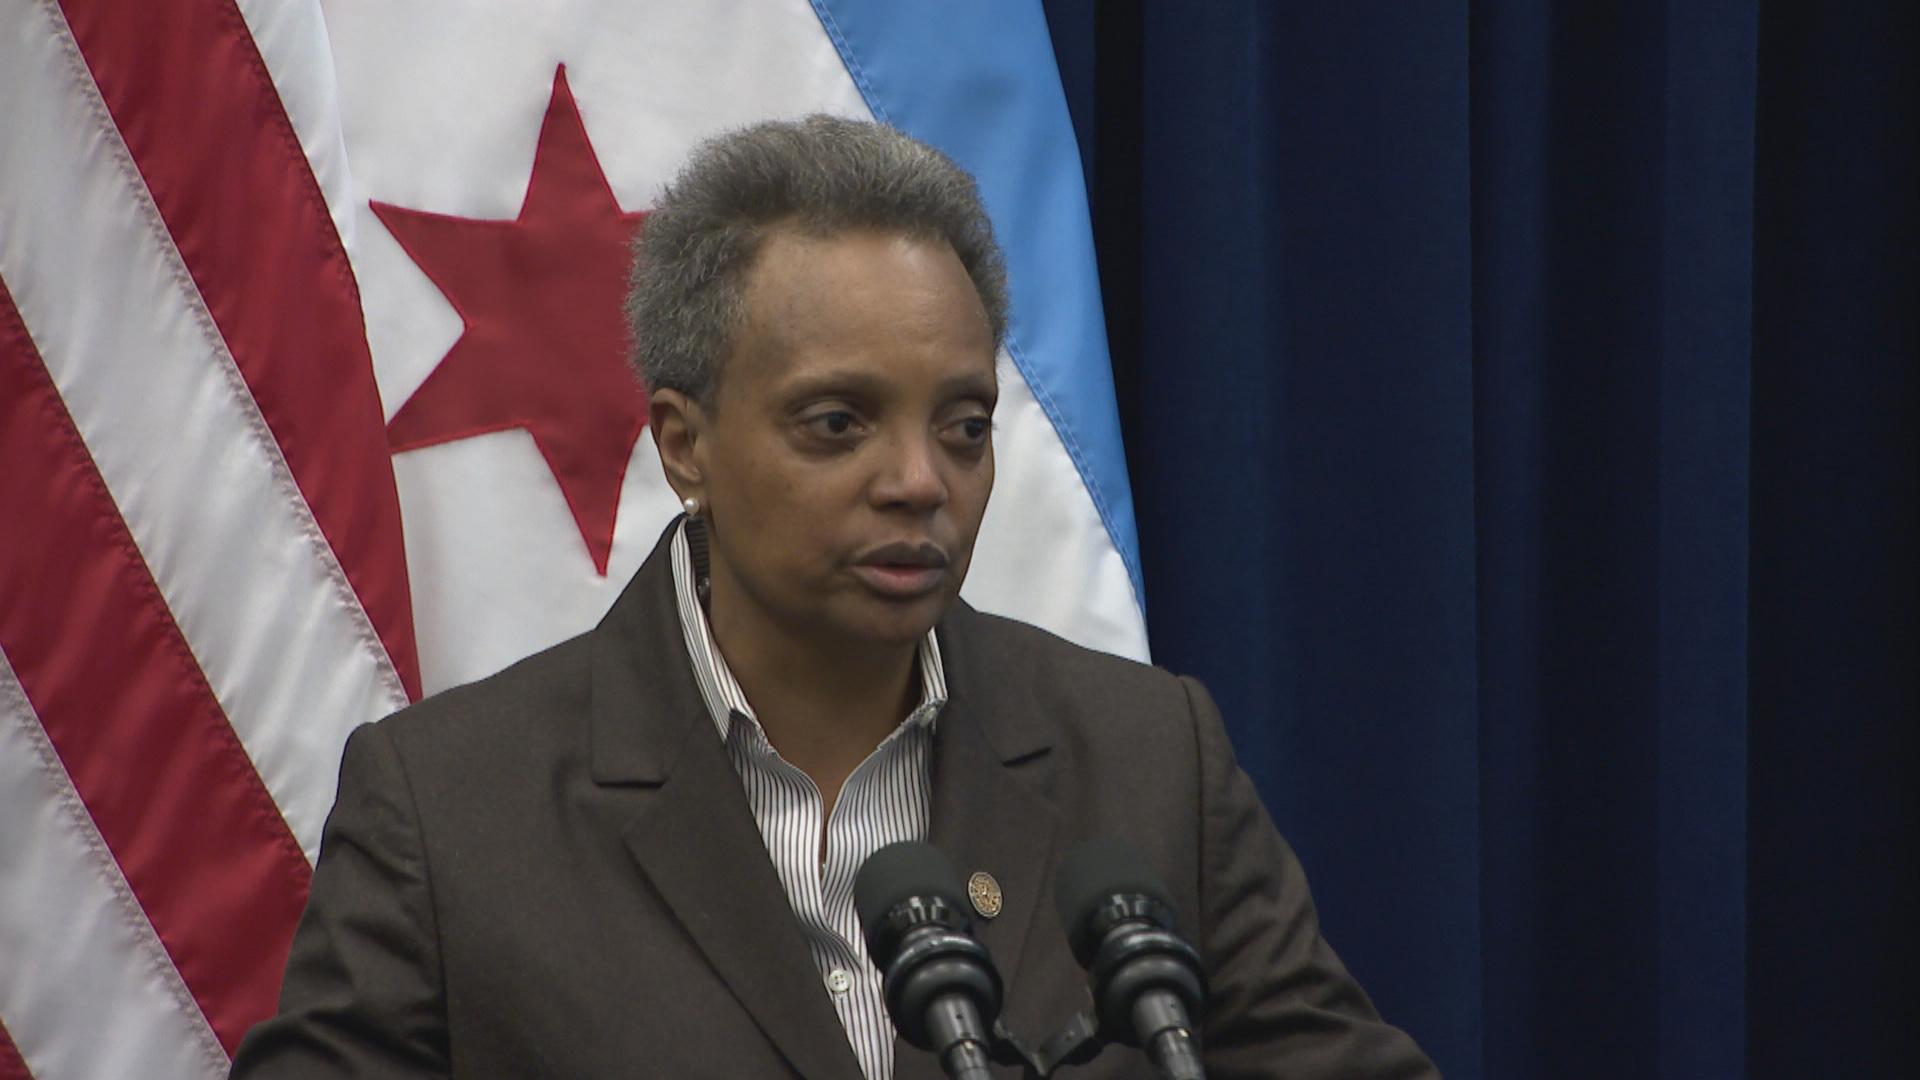 Mayor Lori Lightfoot speaks to the media following a chaotic City Council meeting on Wednesday, Dec. 18, 2019. (WTTW News)